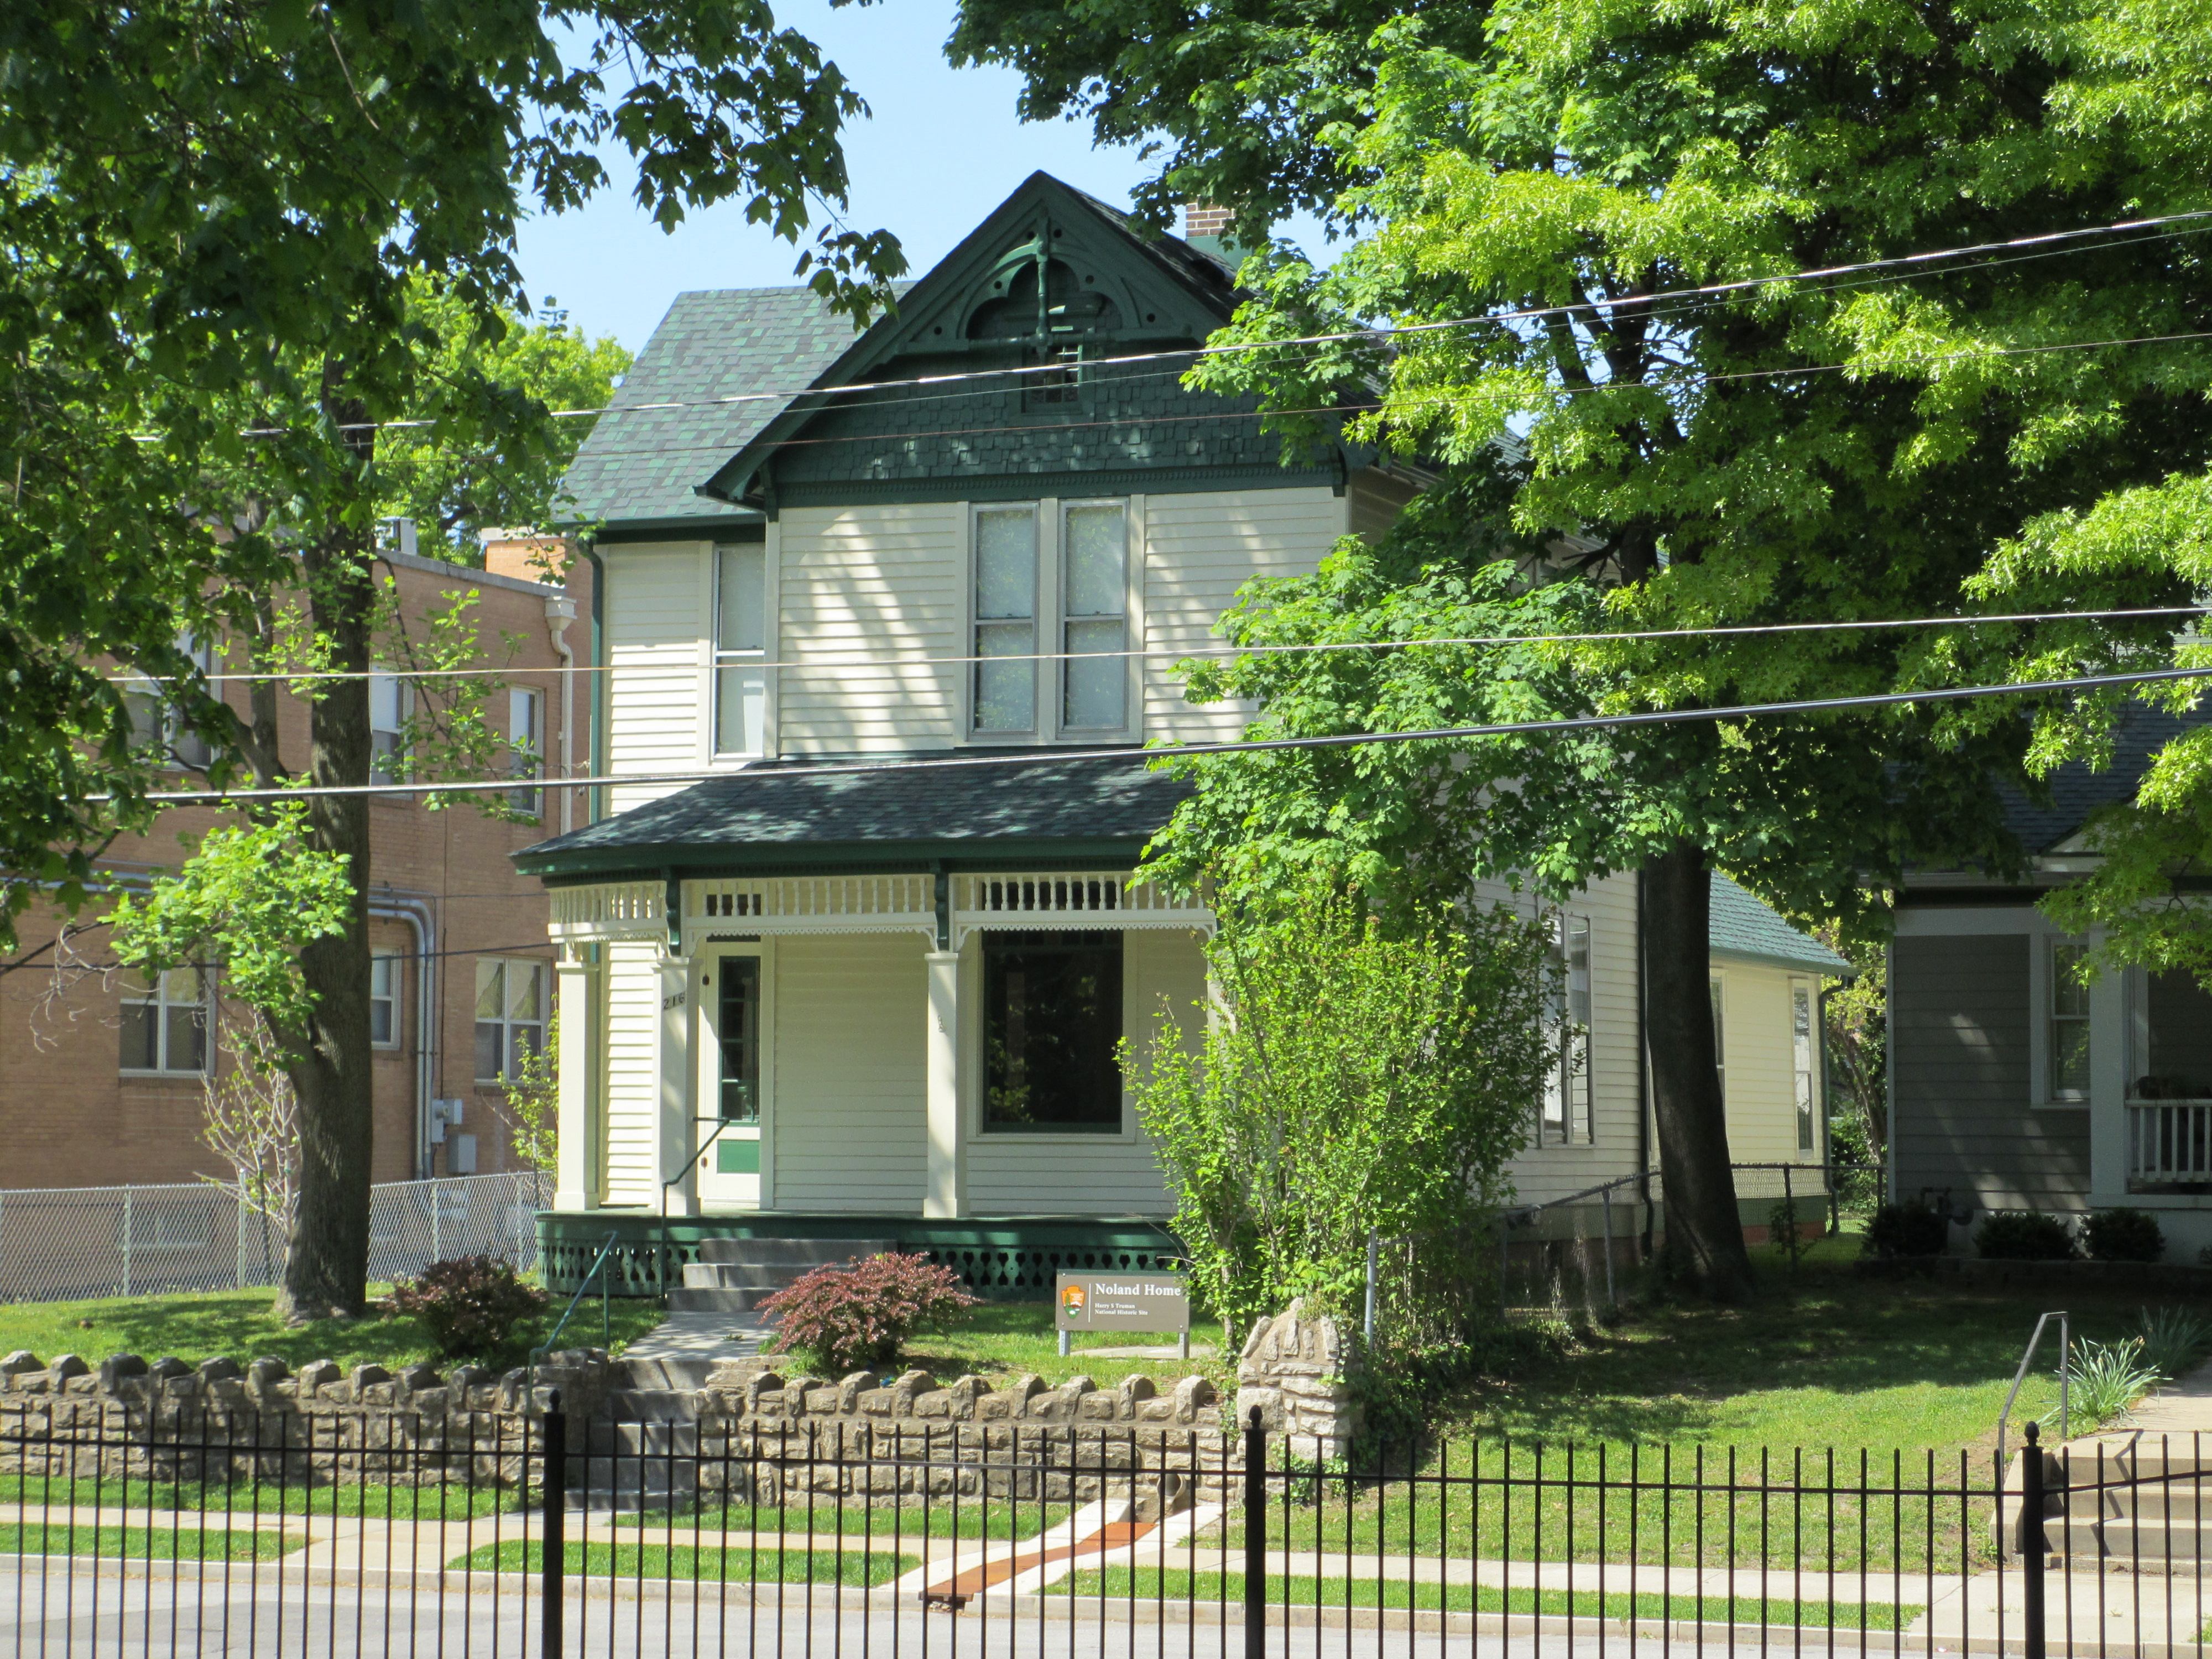 The Noland home sits across the street from the Truman home.